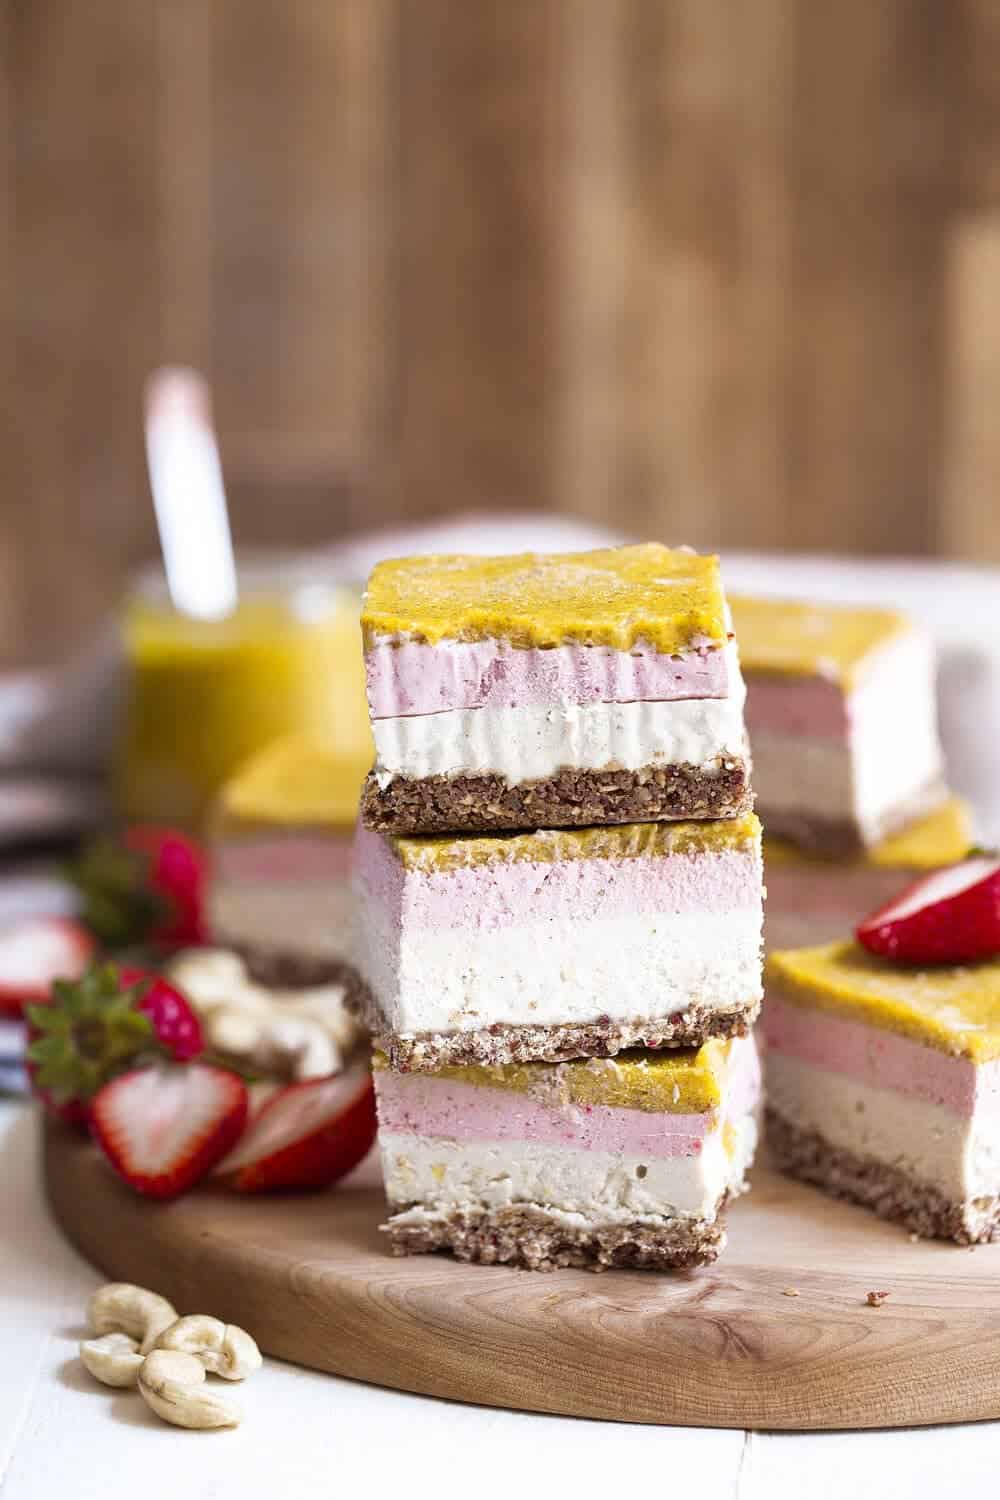 Strawberry & mango cheesecake bars with a granola crust cut into equal portions on a wooden board